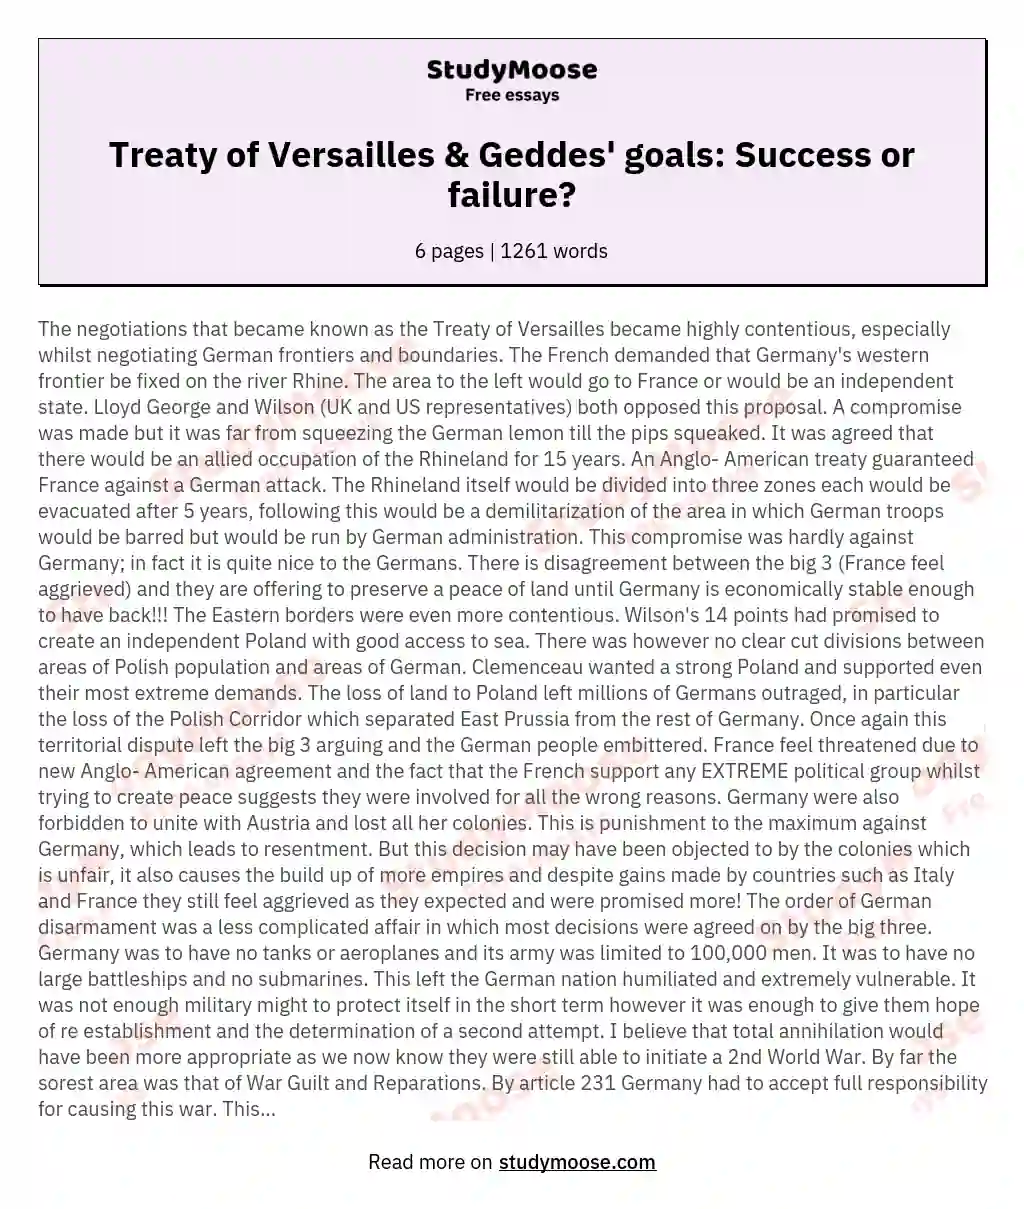 How far was this the aim of the Treaty of Versailles and did it succeed in fulfilling Geddes hopes?